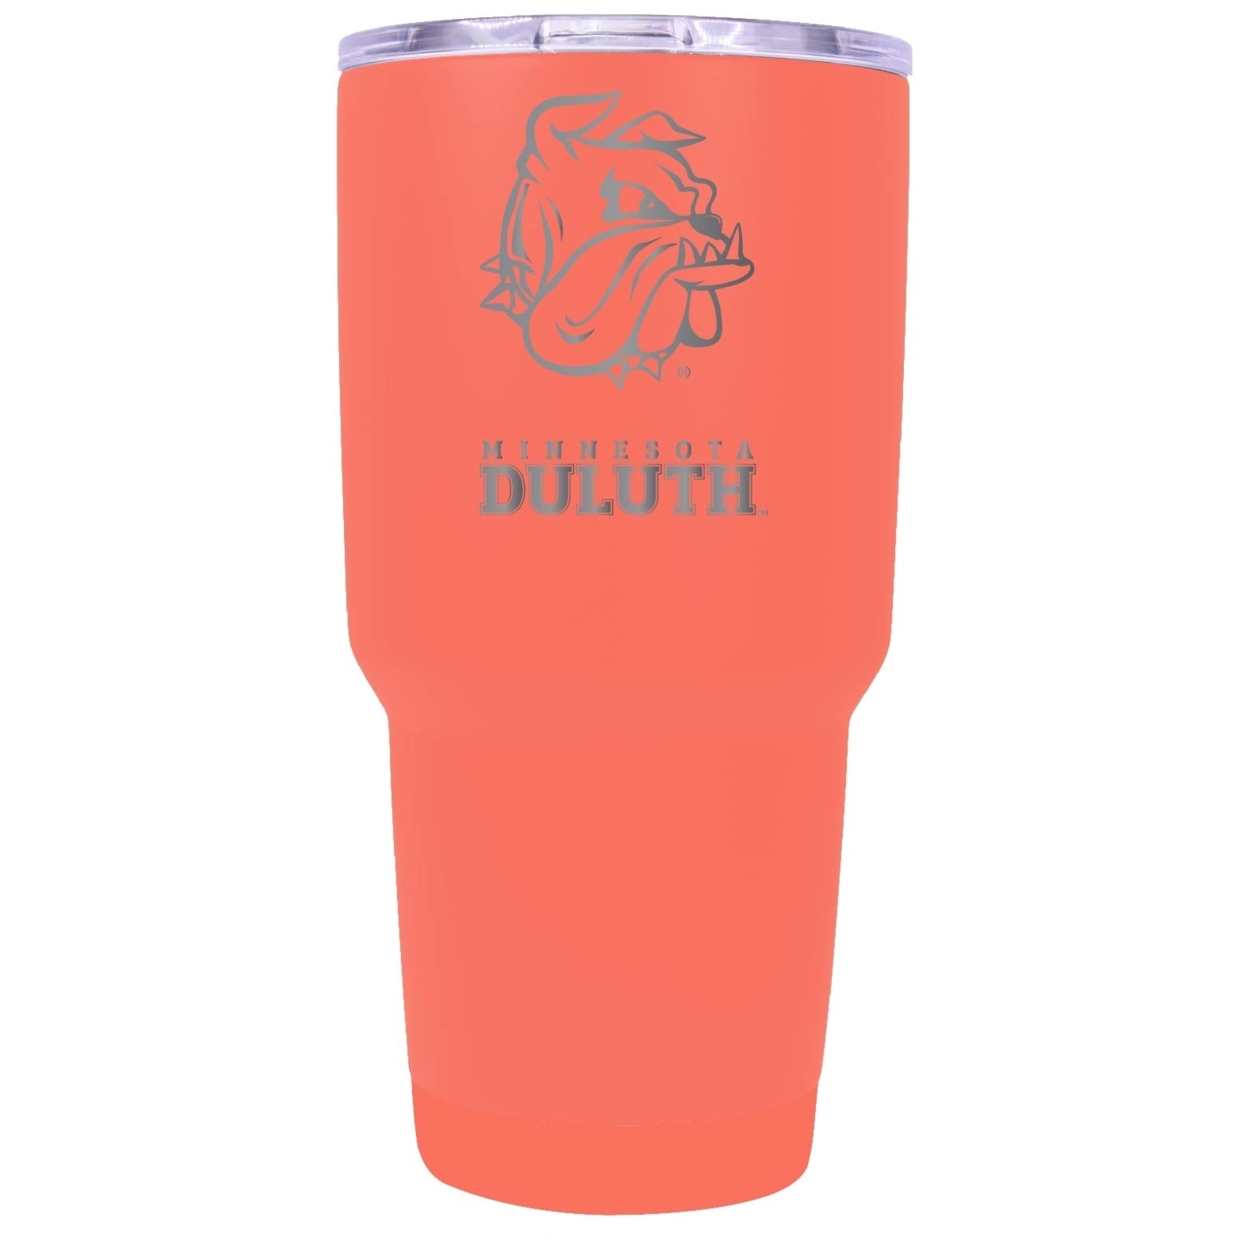 Minnesota Duluth Bulldogs 24 Oz Laser Engraved Stainless Steel Insulated Tumbler - Choose Your Color. - Coral